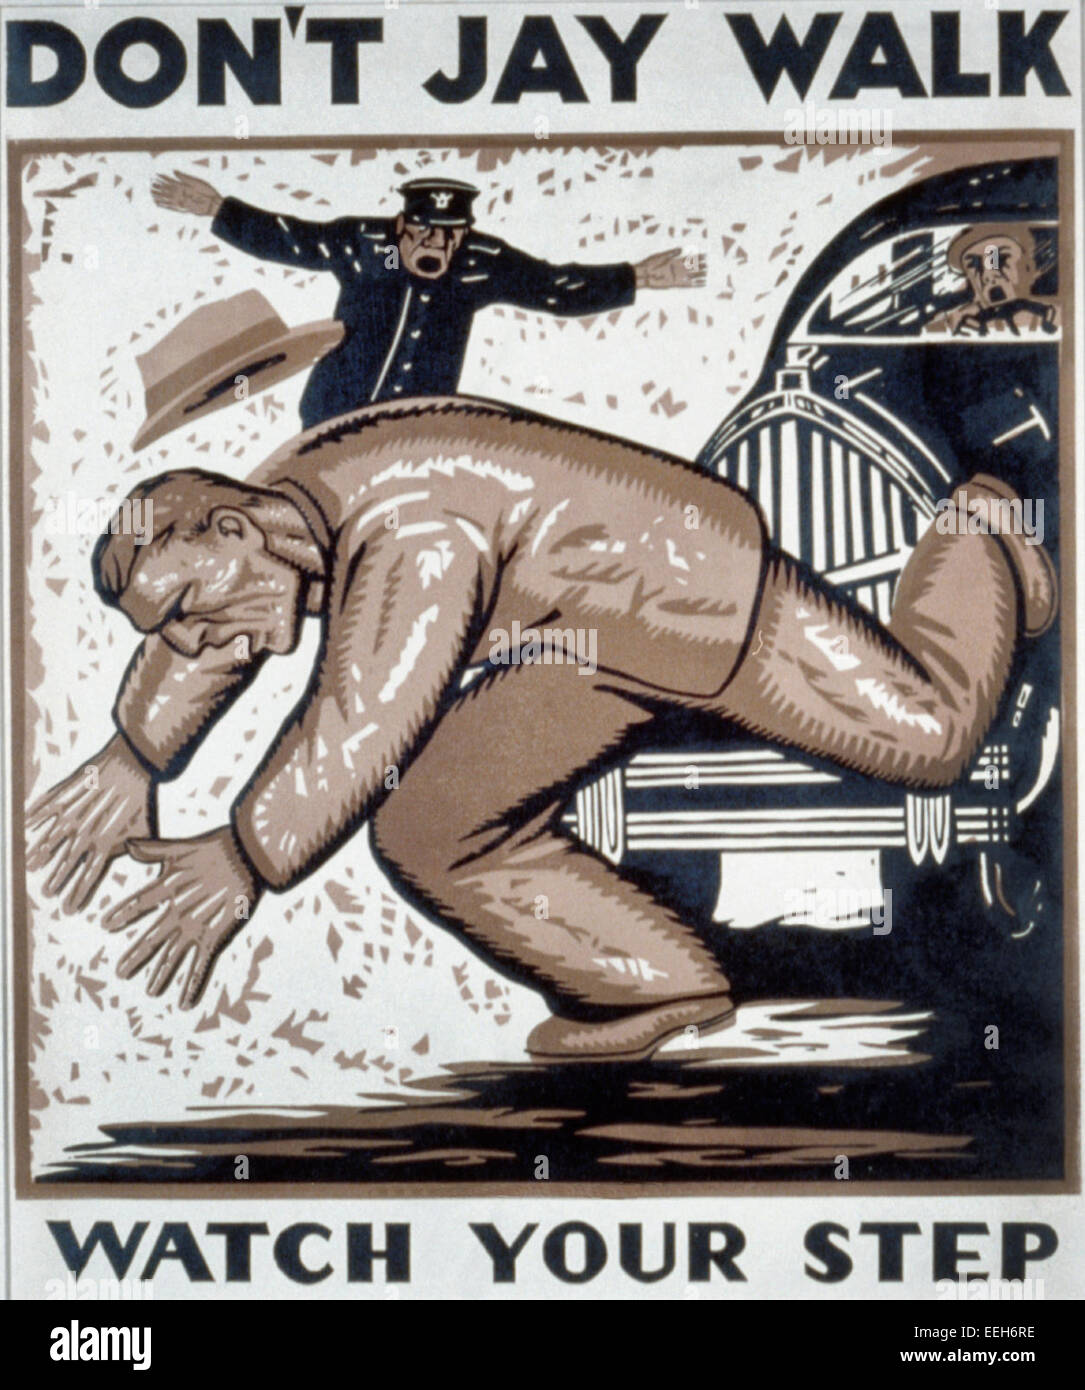 Don't jay walk Watch your step. Poster encouraging pedestrians to obey the laws, showing a man being hit by an automobile while crossing the street, a policeman stands in the background. Circa 1936 Stock Photo